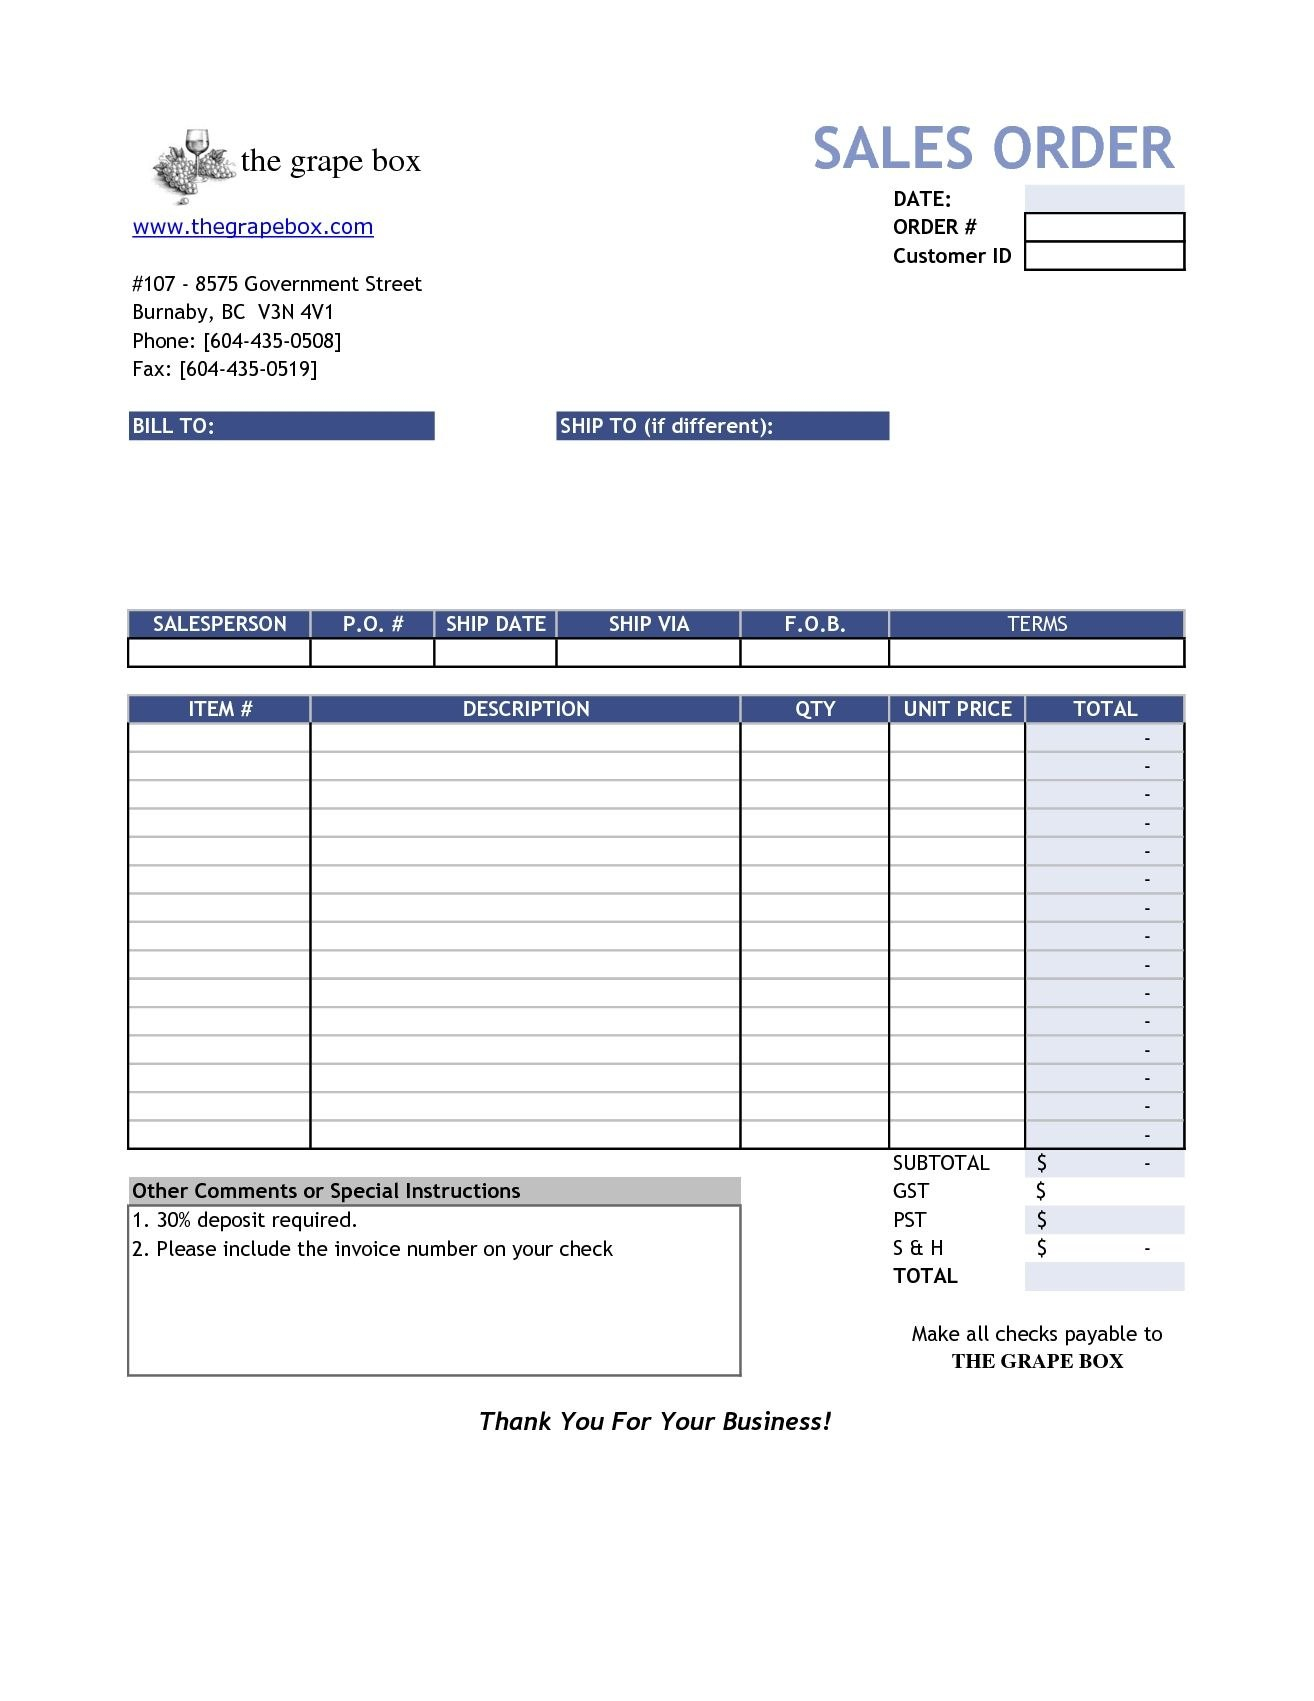 Sale Invoice Template Plan Rare Templates Sales Australia Sample with Car Sales Invoice Template Free Download